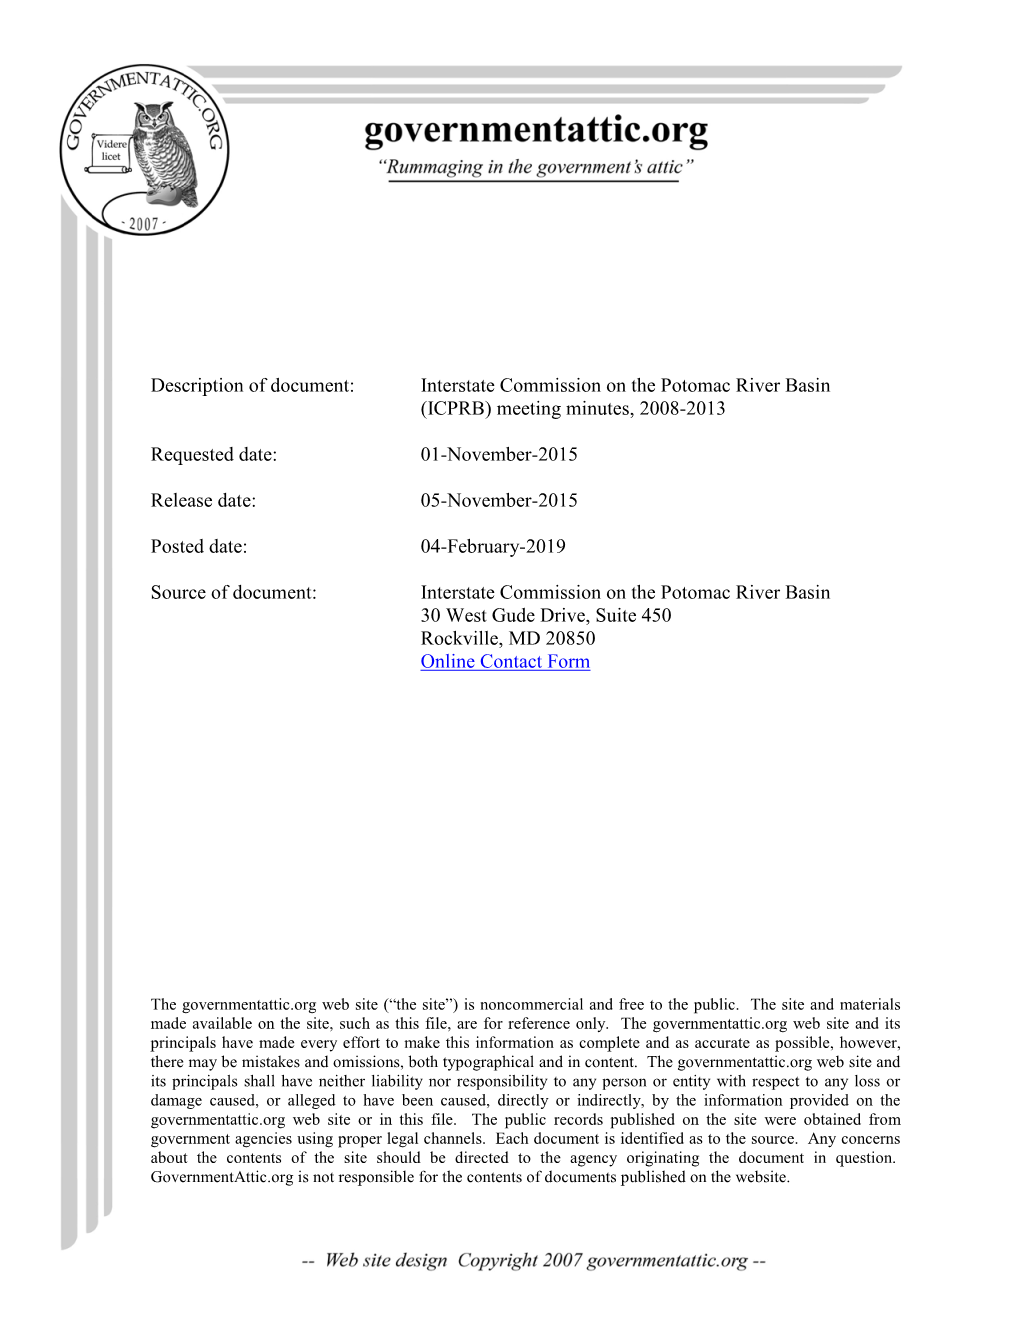 Interstate Commission on the Potomac River Basin (ICPRB) Meeting Minutes, 2008-2013